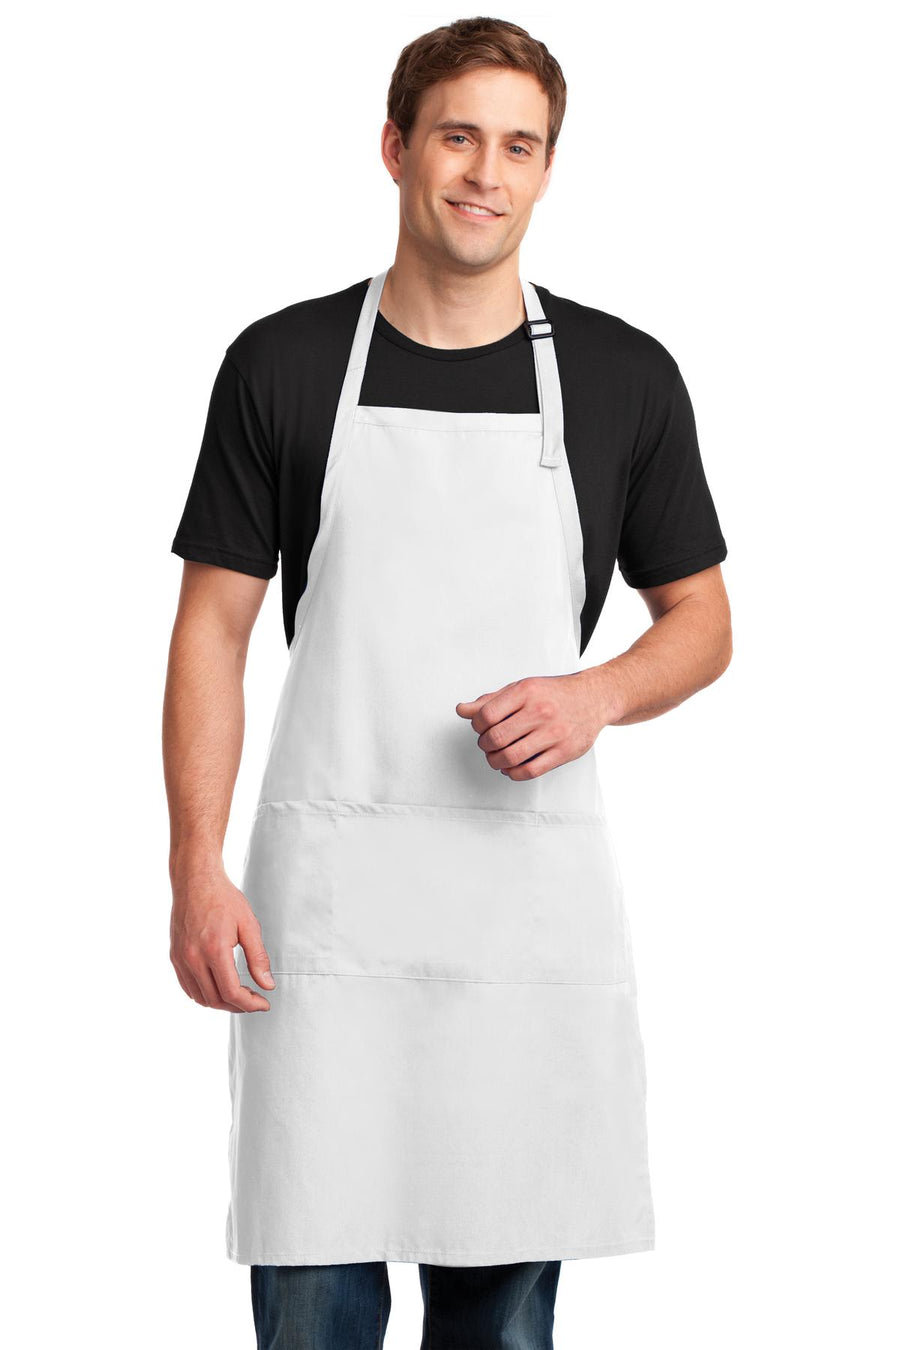 Port Authority Easy Care Extra Long Bib Apron with Stain Release.